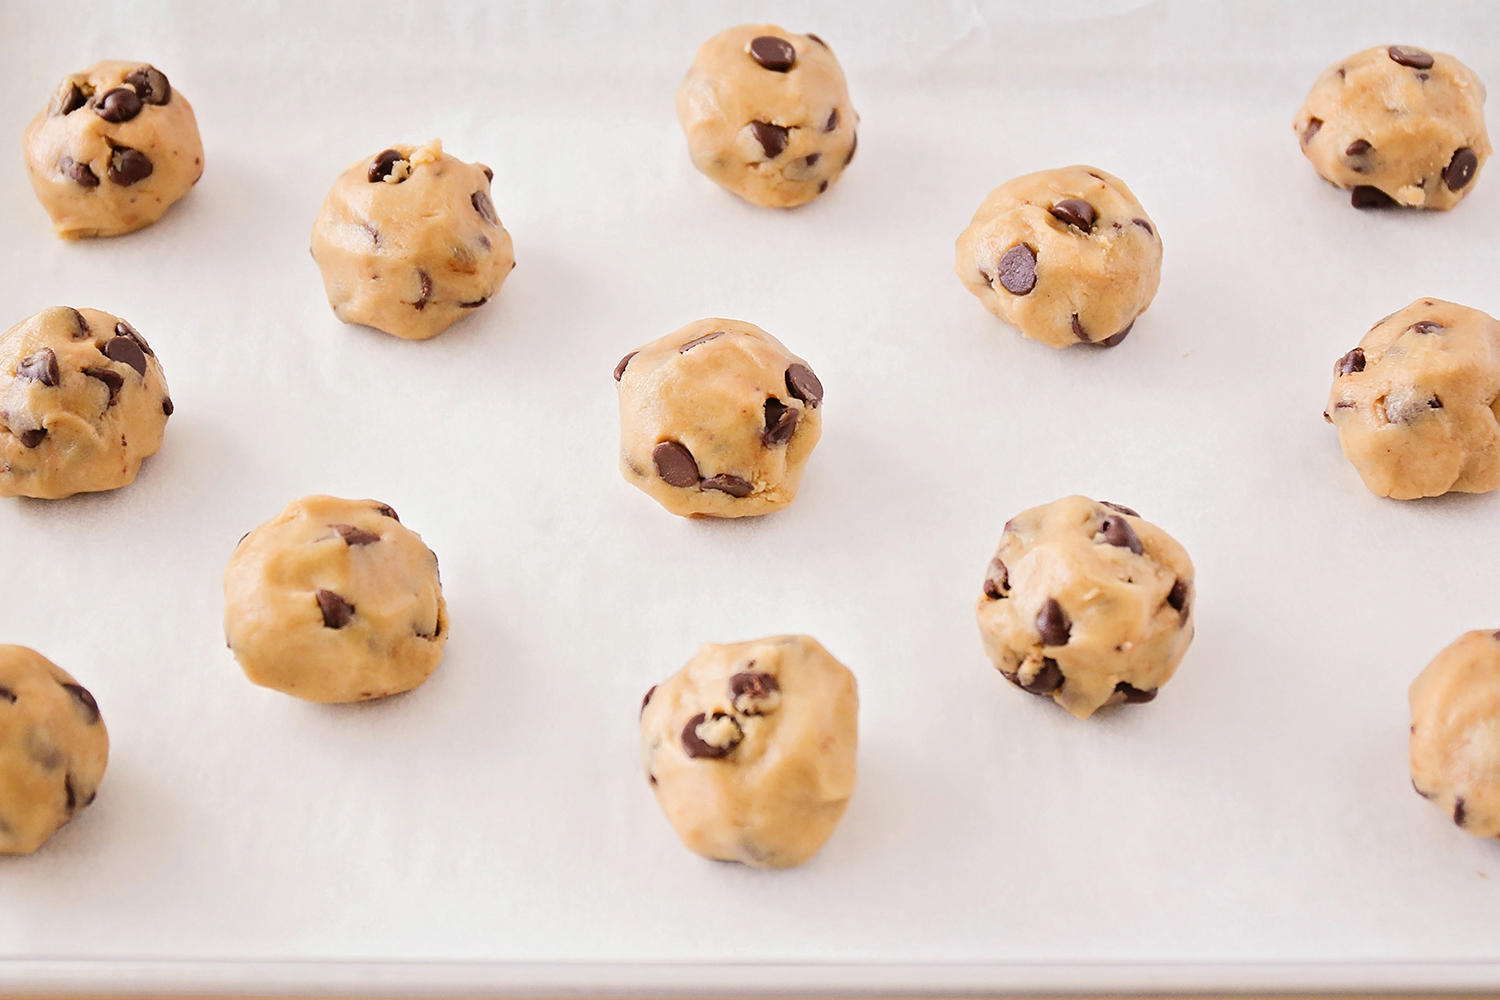 These Reese's stuffed chocolate chip cookies combine two favorite treats into one decadent cookie!